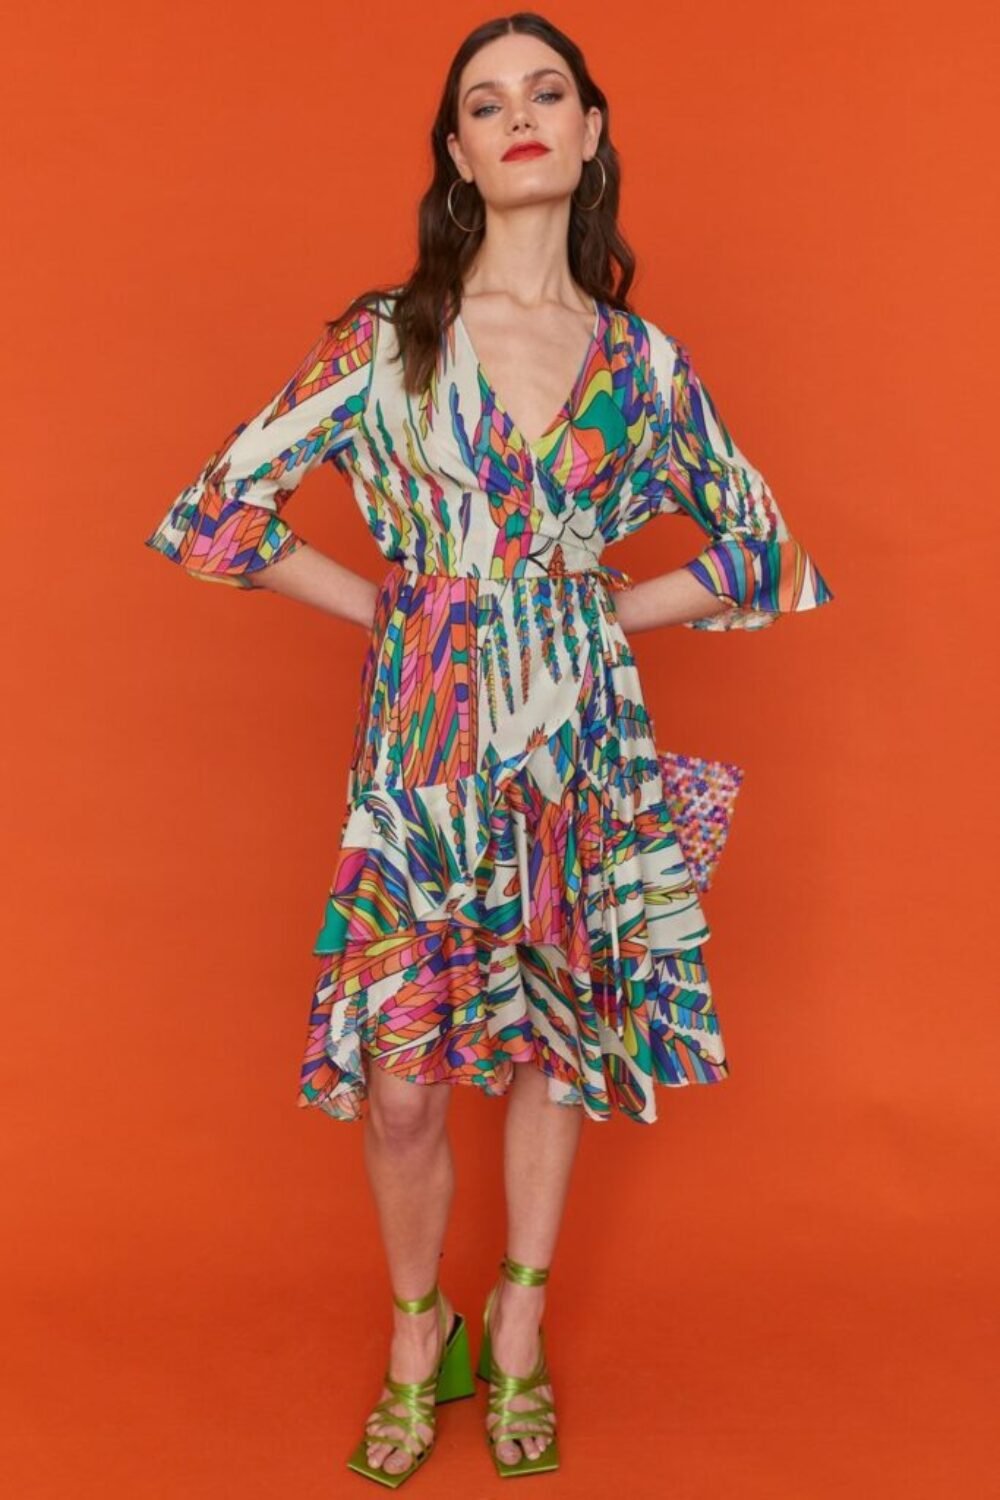 Shop Lux Havanna Tropical Wrap Midi Dress and women's luxury and designer clothes at www.lux-apparel.co.uk